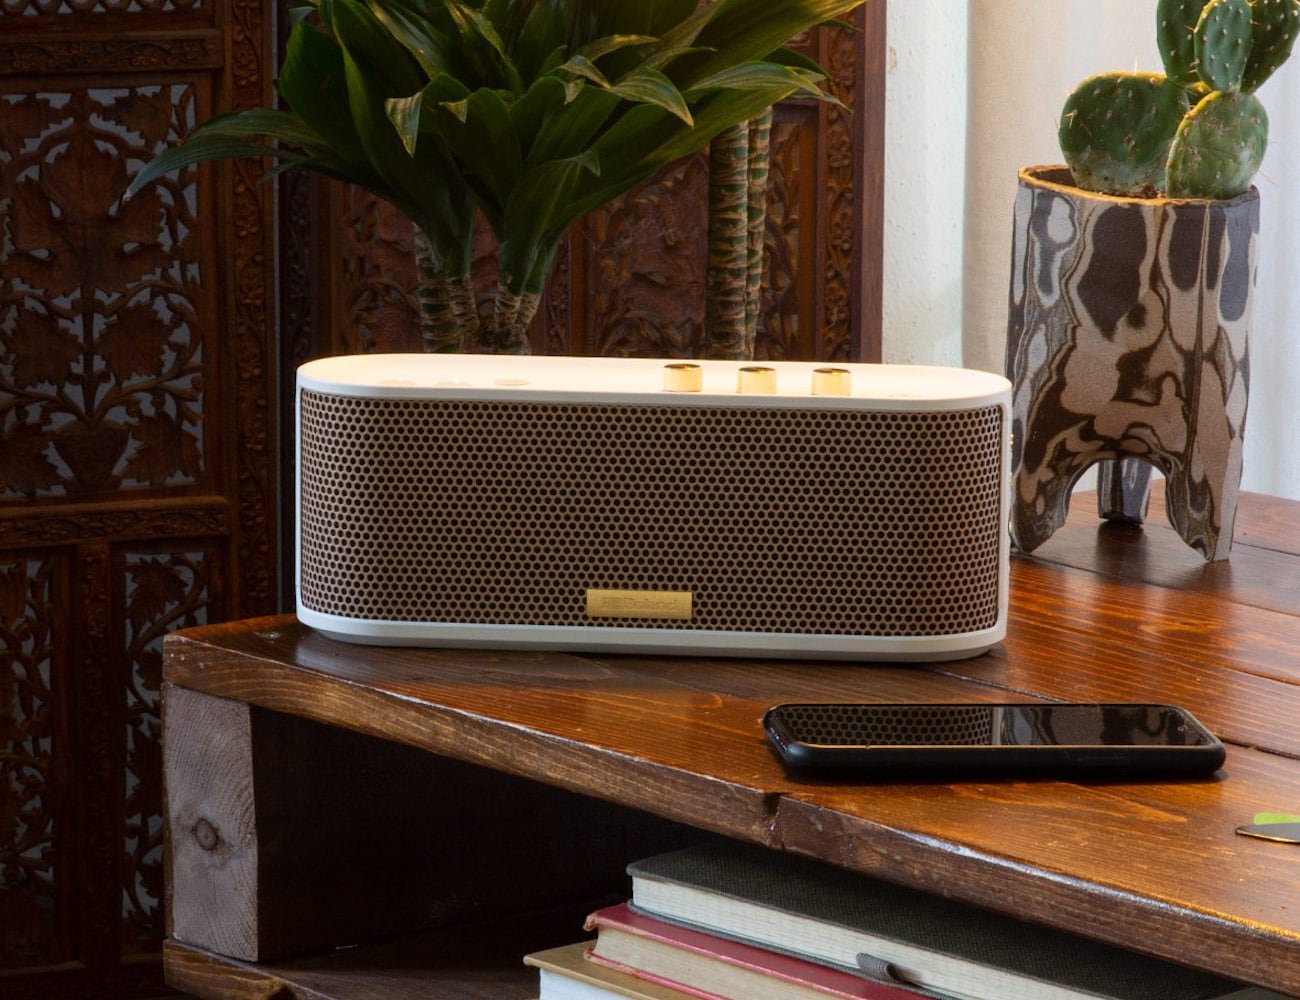 Roland BTM-1 Bluetooth speaker with instrument input lets you play along to your songs